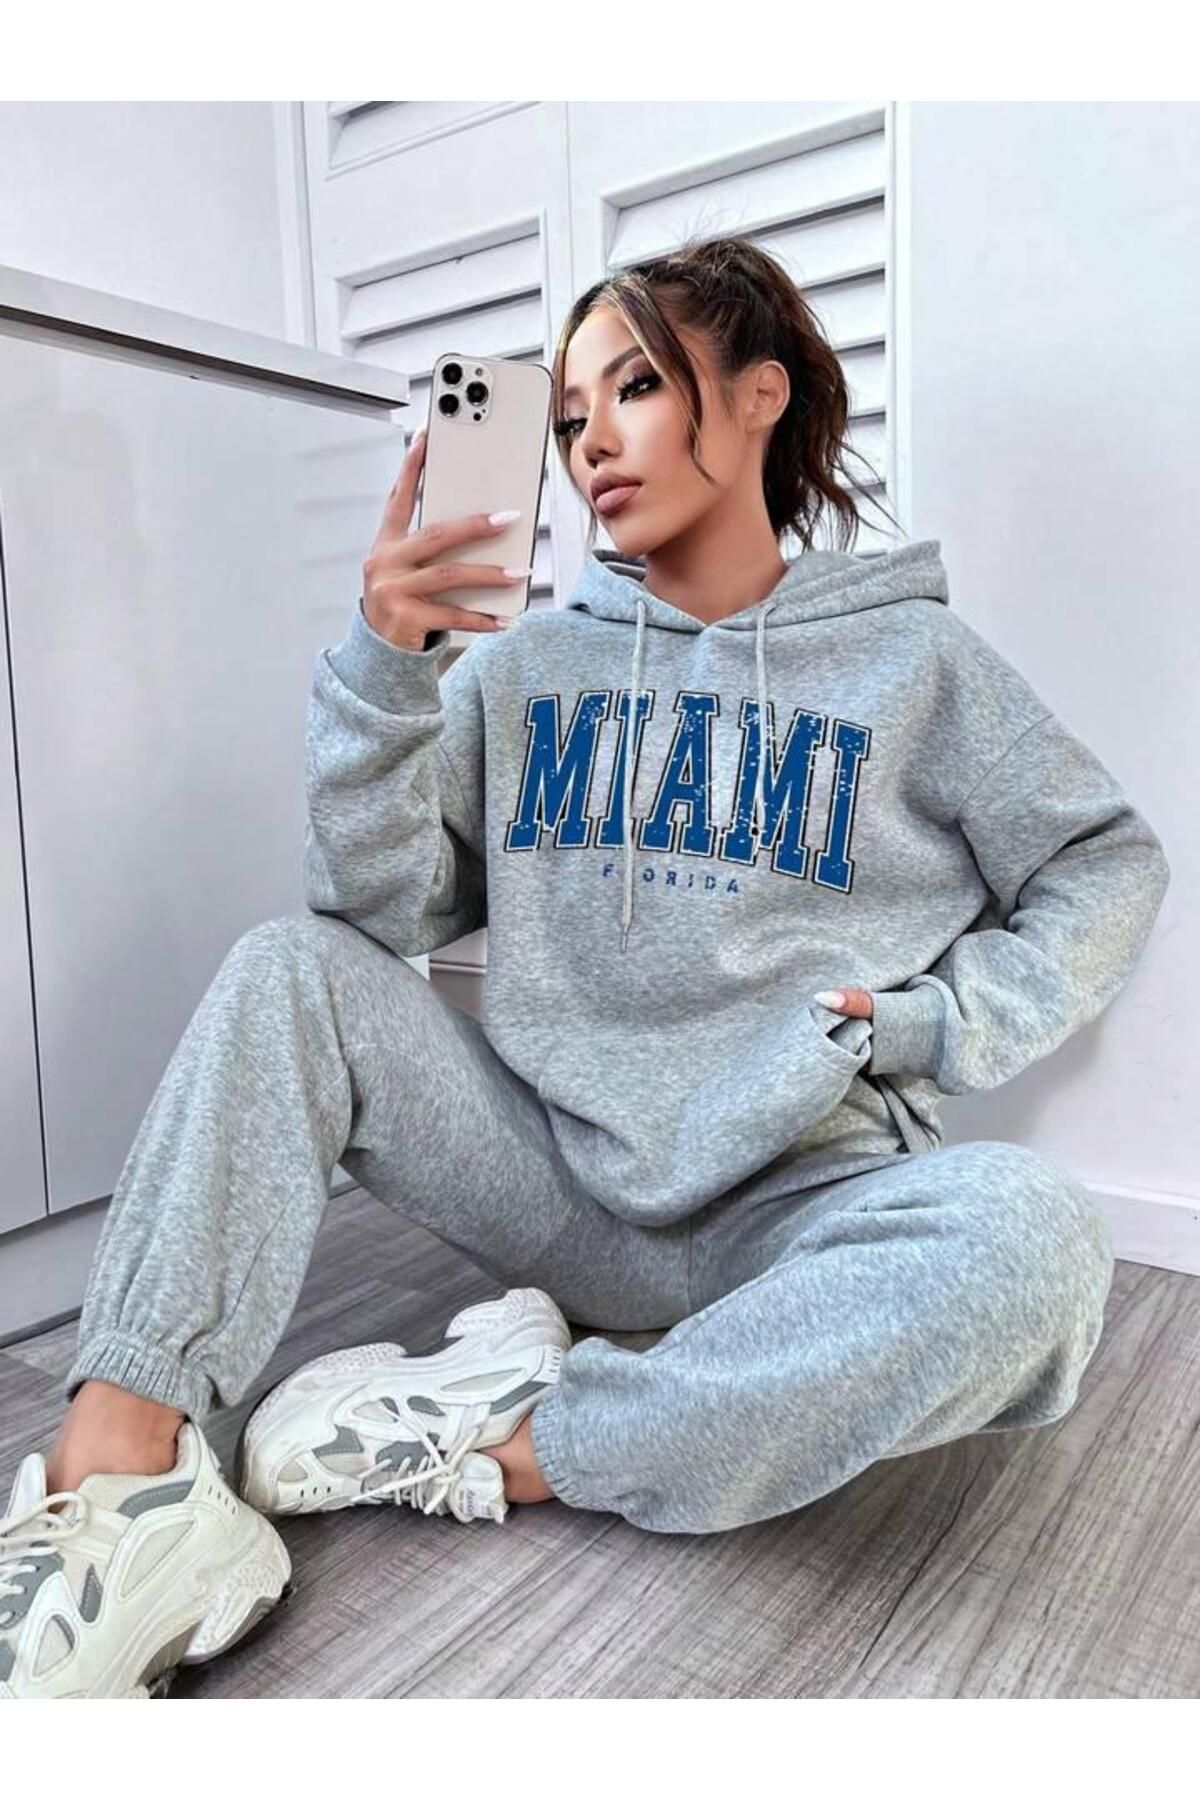 Womens Designer Tracksuit Set With Hooded Fleece Gray Sweatsuit Womens And  Vest Long Sleeve, Casual, Wholesale Clothes 10299 From Sell_clothing,  $30.57